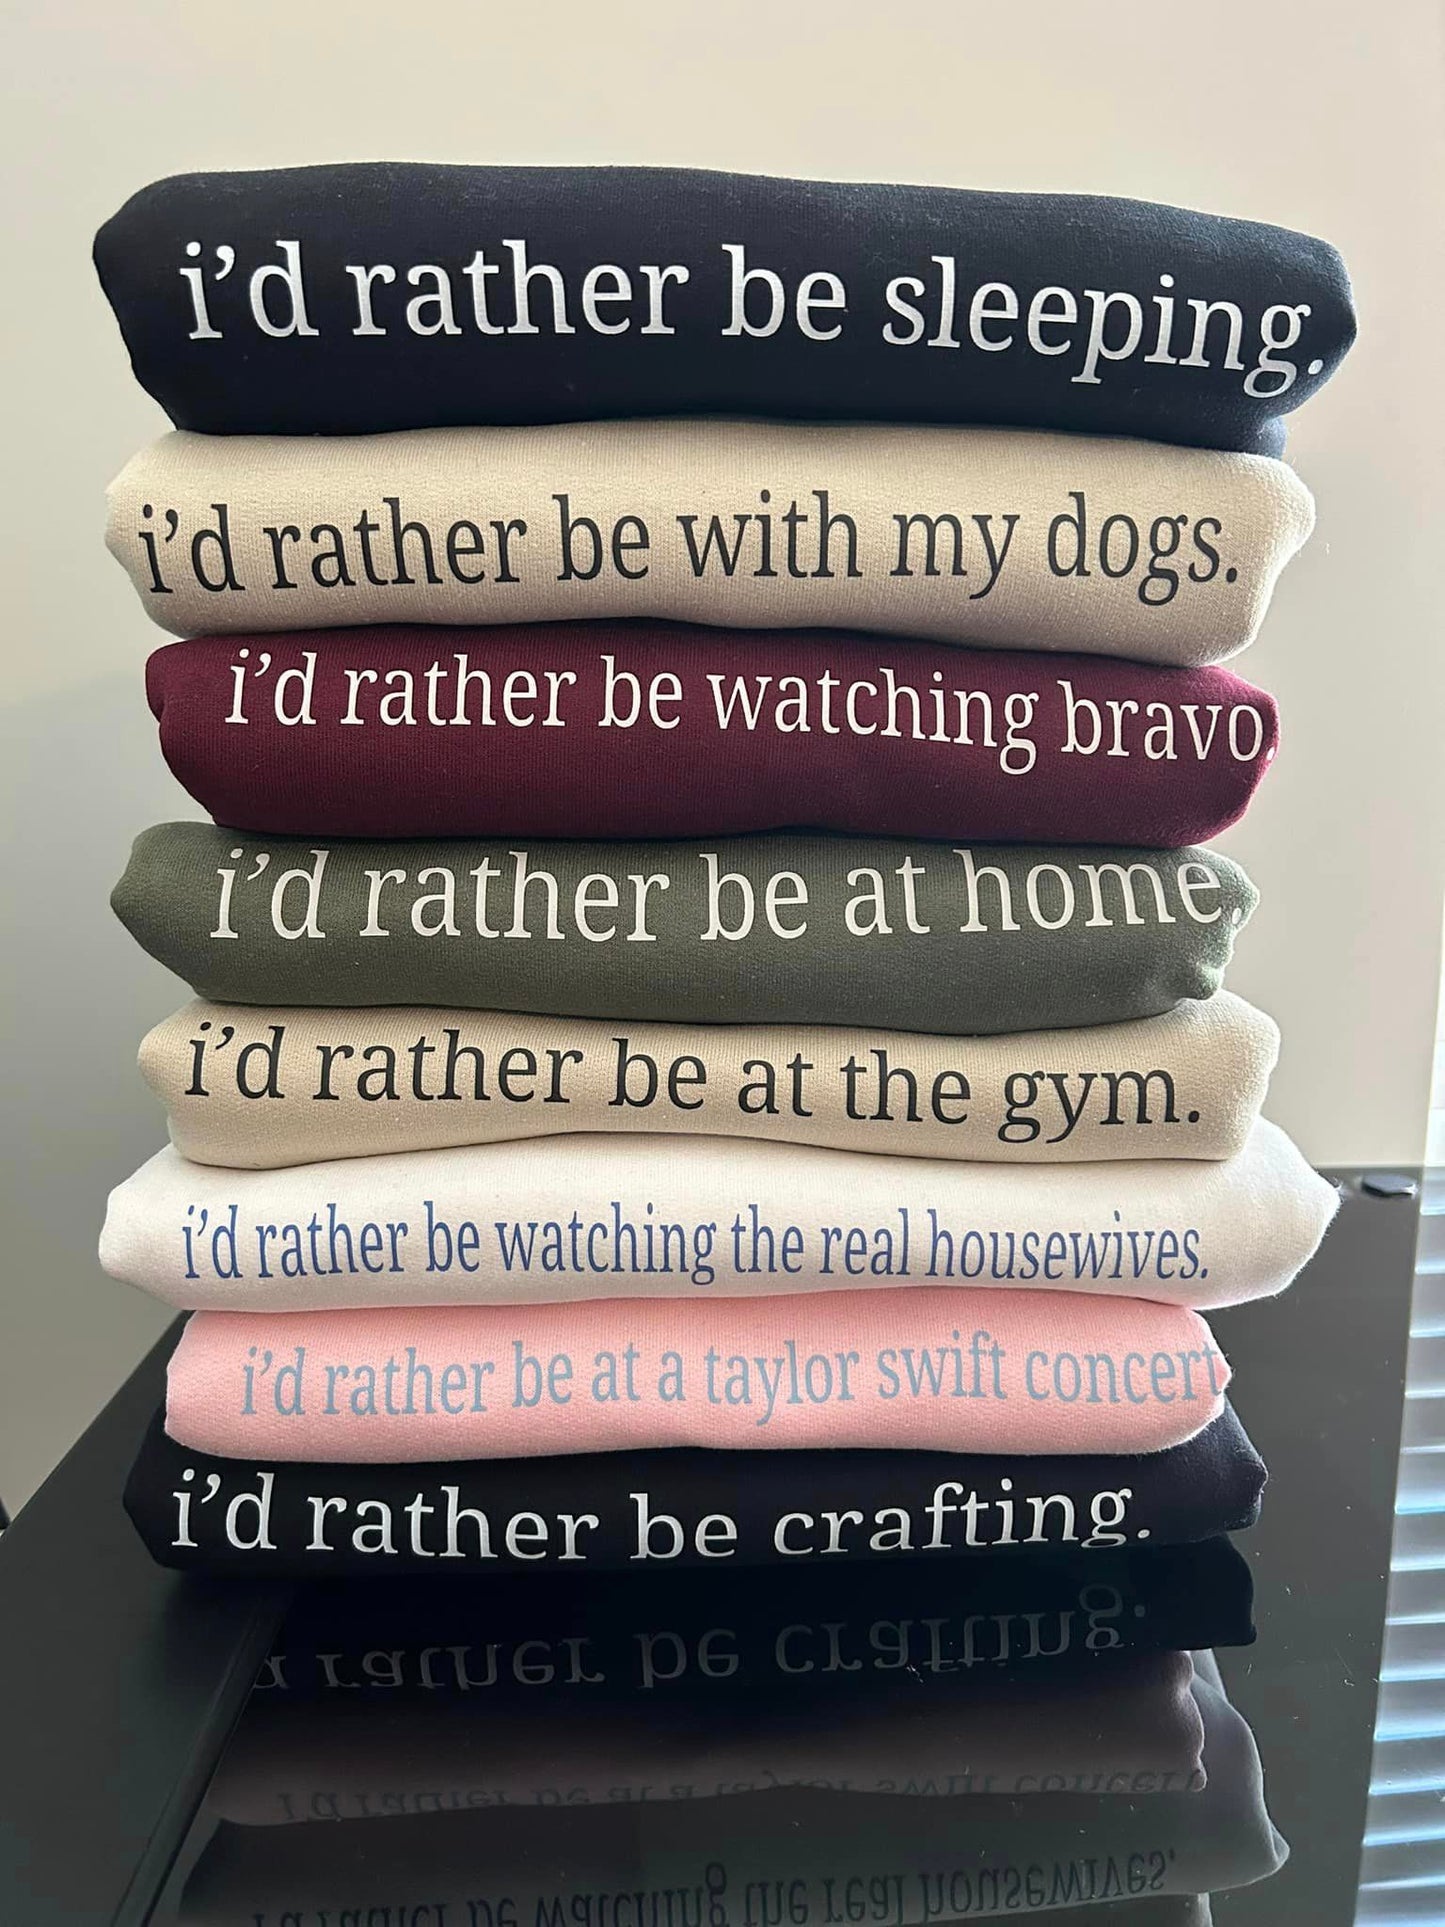 i'd rather be watching bravo T-SHIRT OR PICK FROM 200 COLOR & STYLE OPTIONS! - TAT 4-7 DAYS